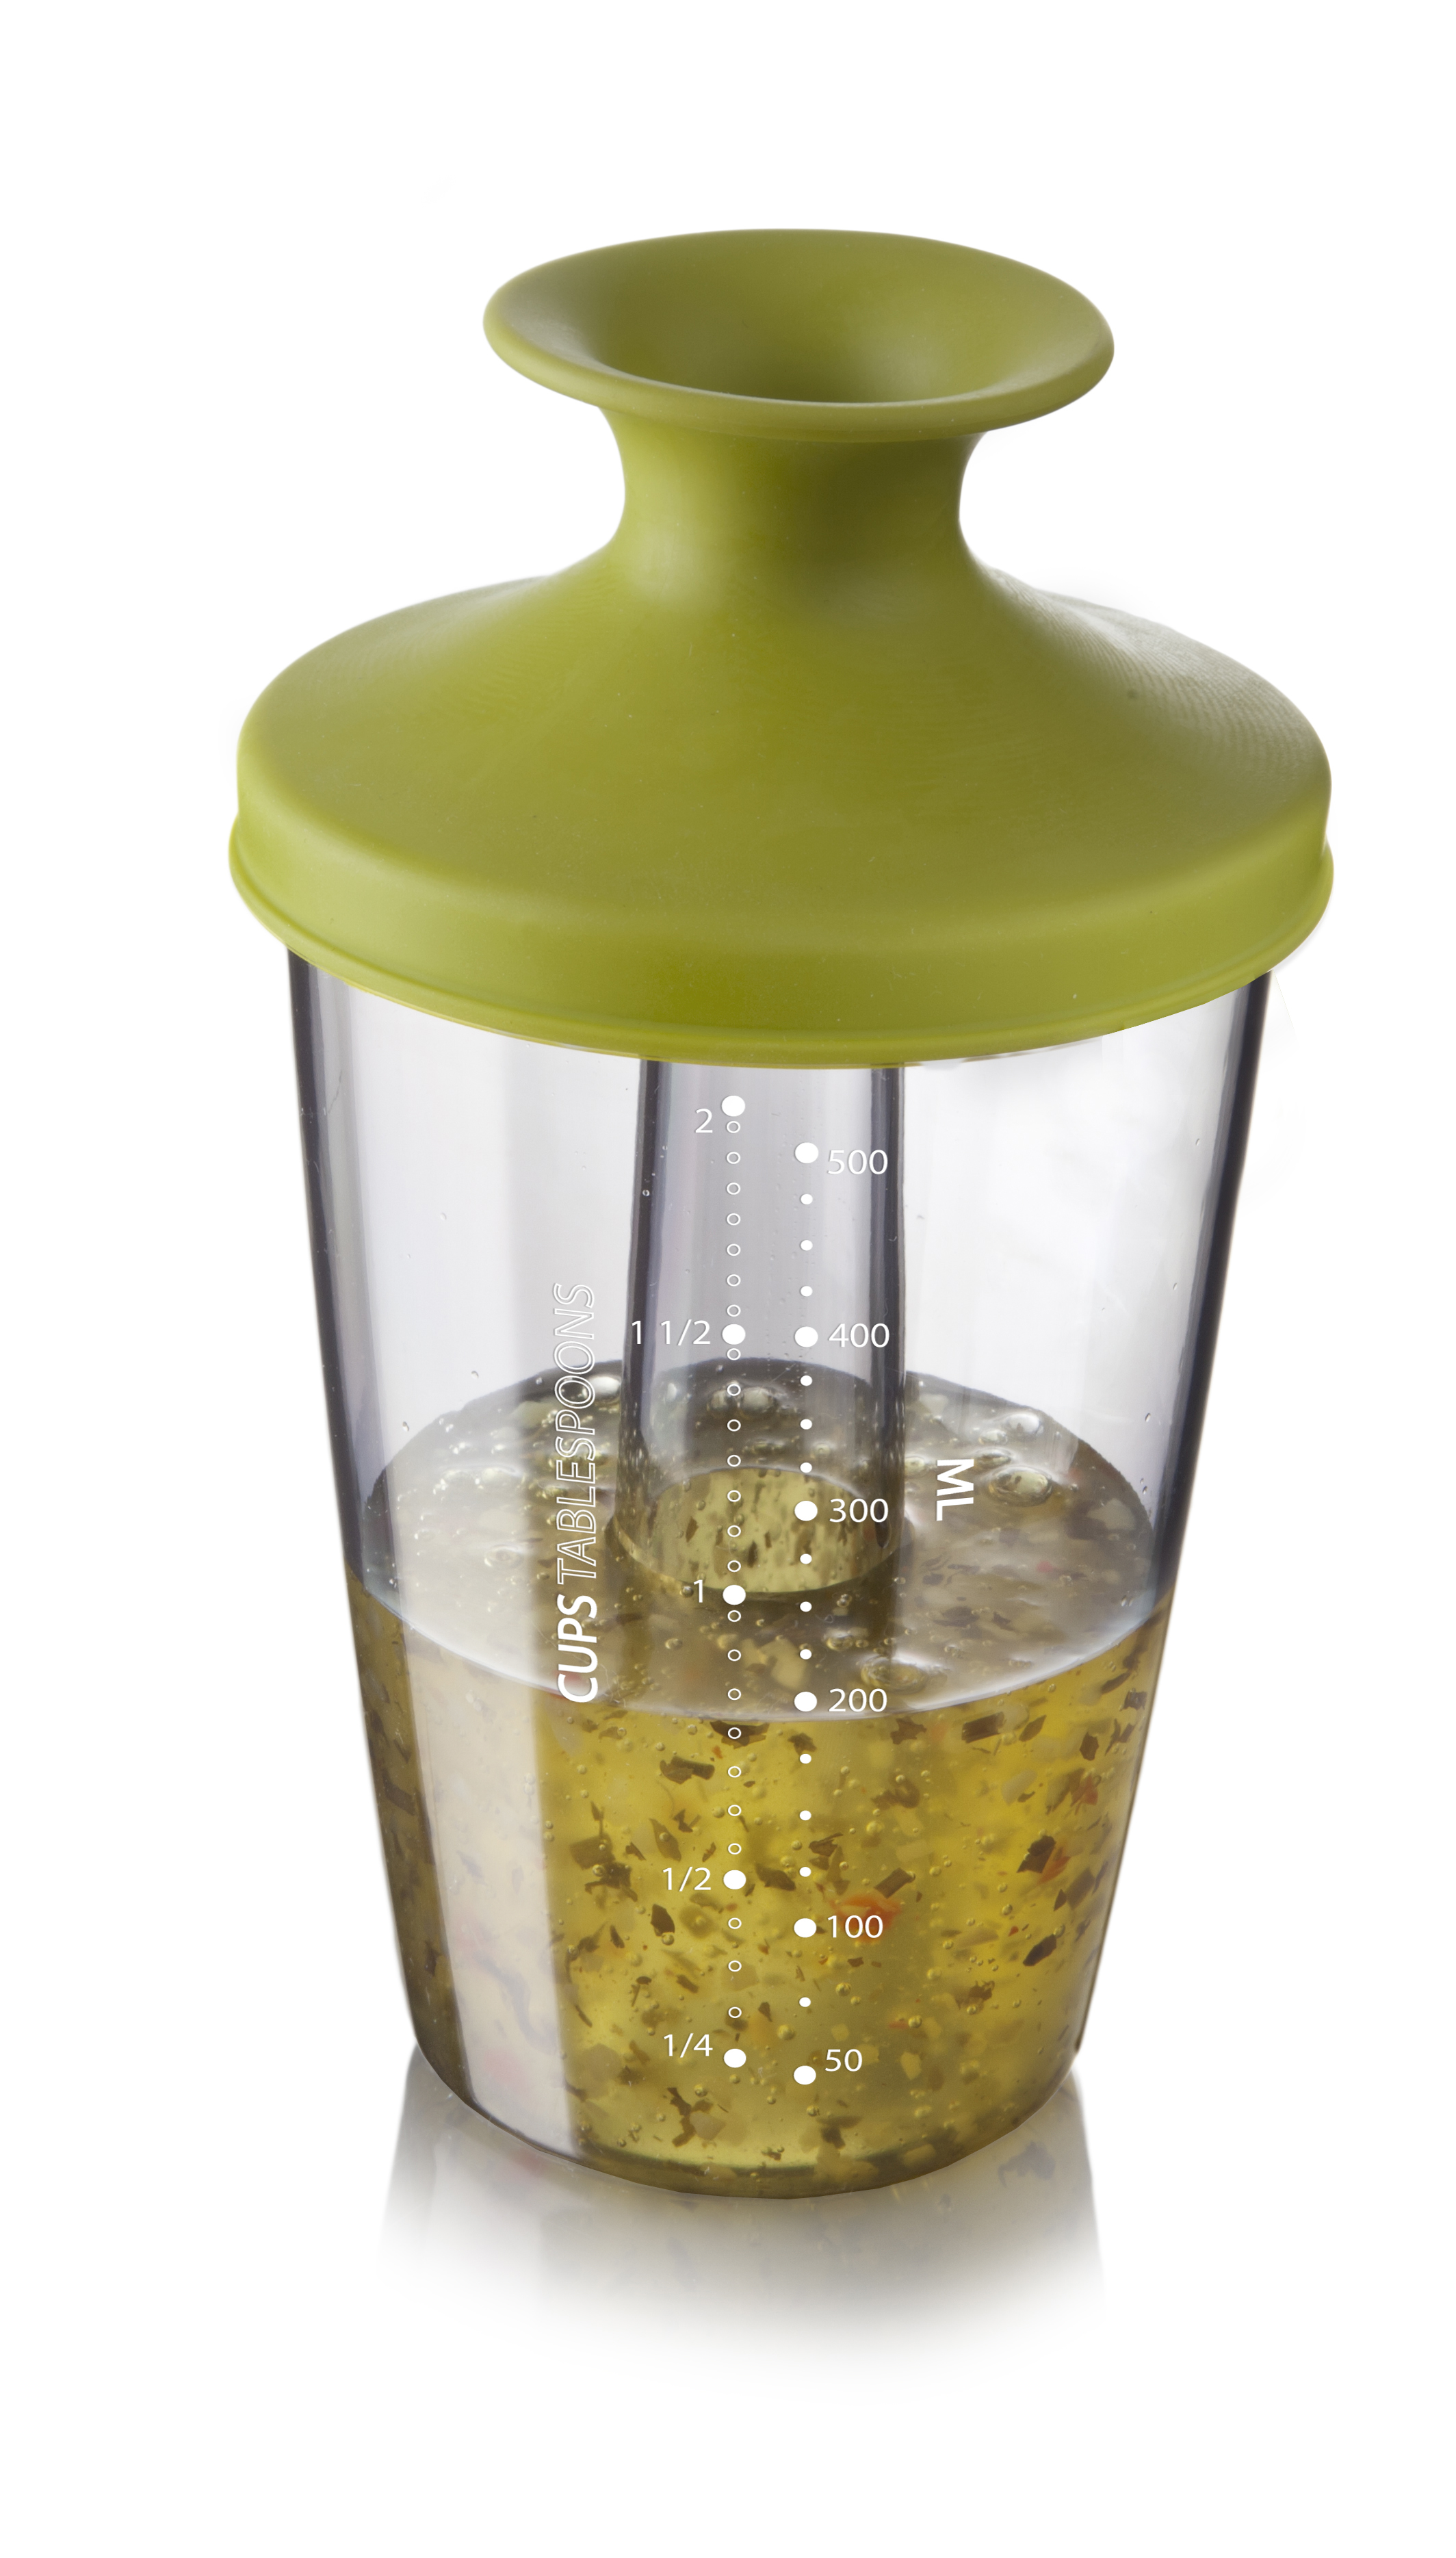 2833650 Popsome Flavour Dressing & Marinade Shaker, Green Lid